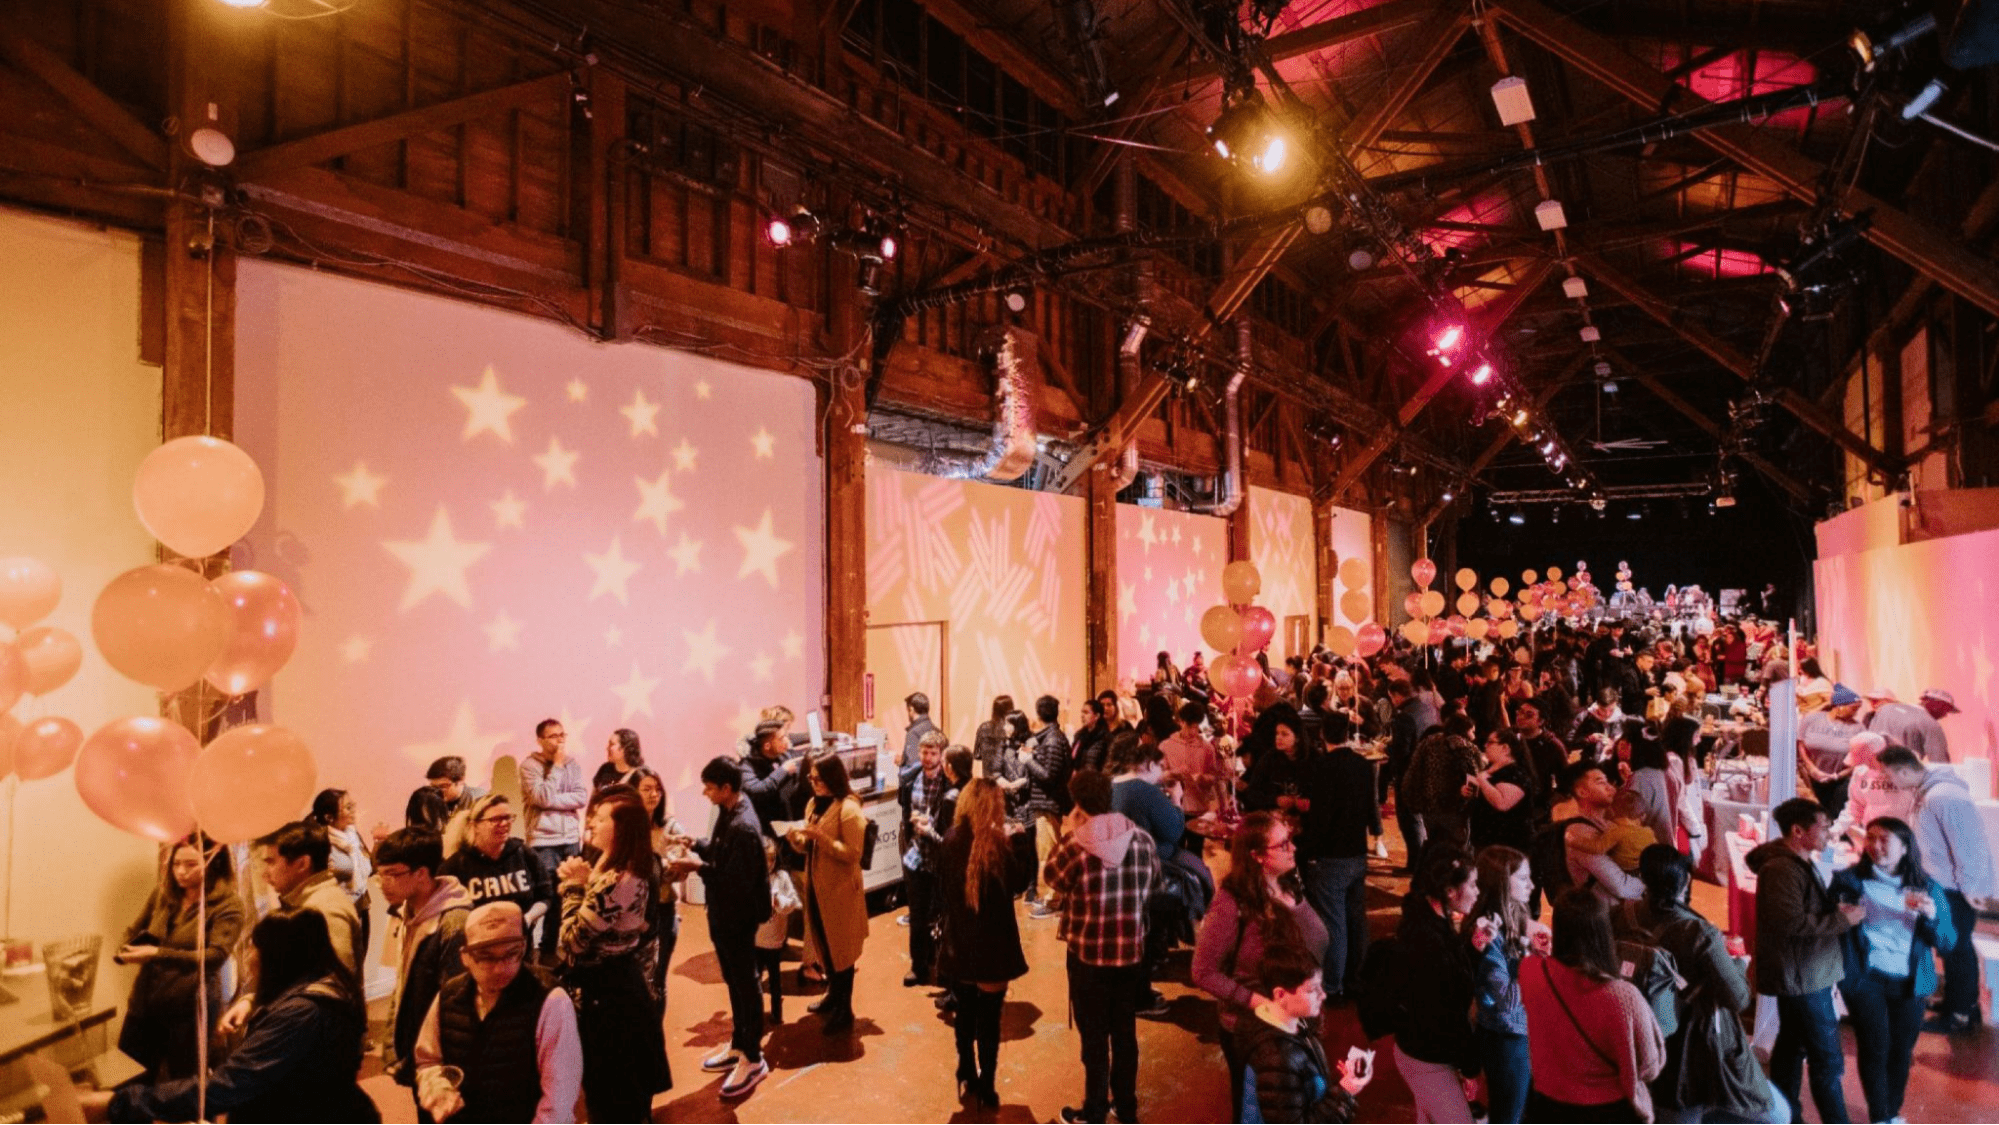 A crowd mingles at a food event